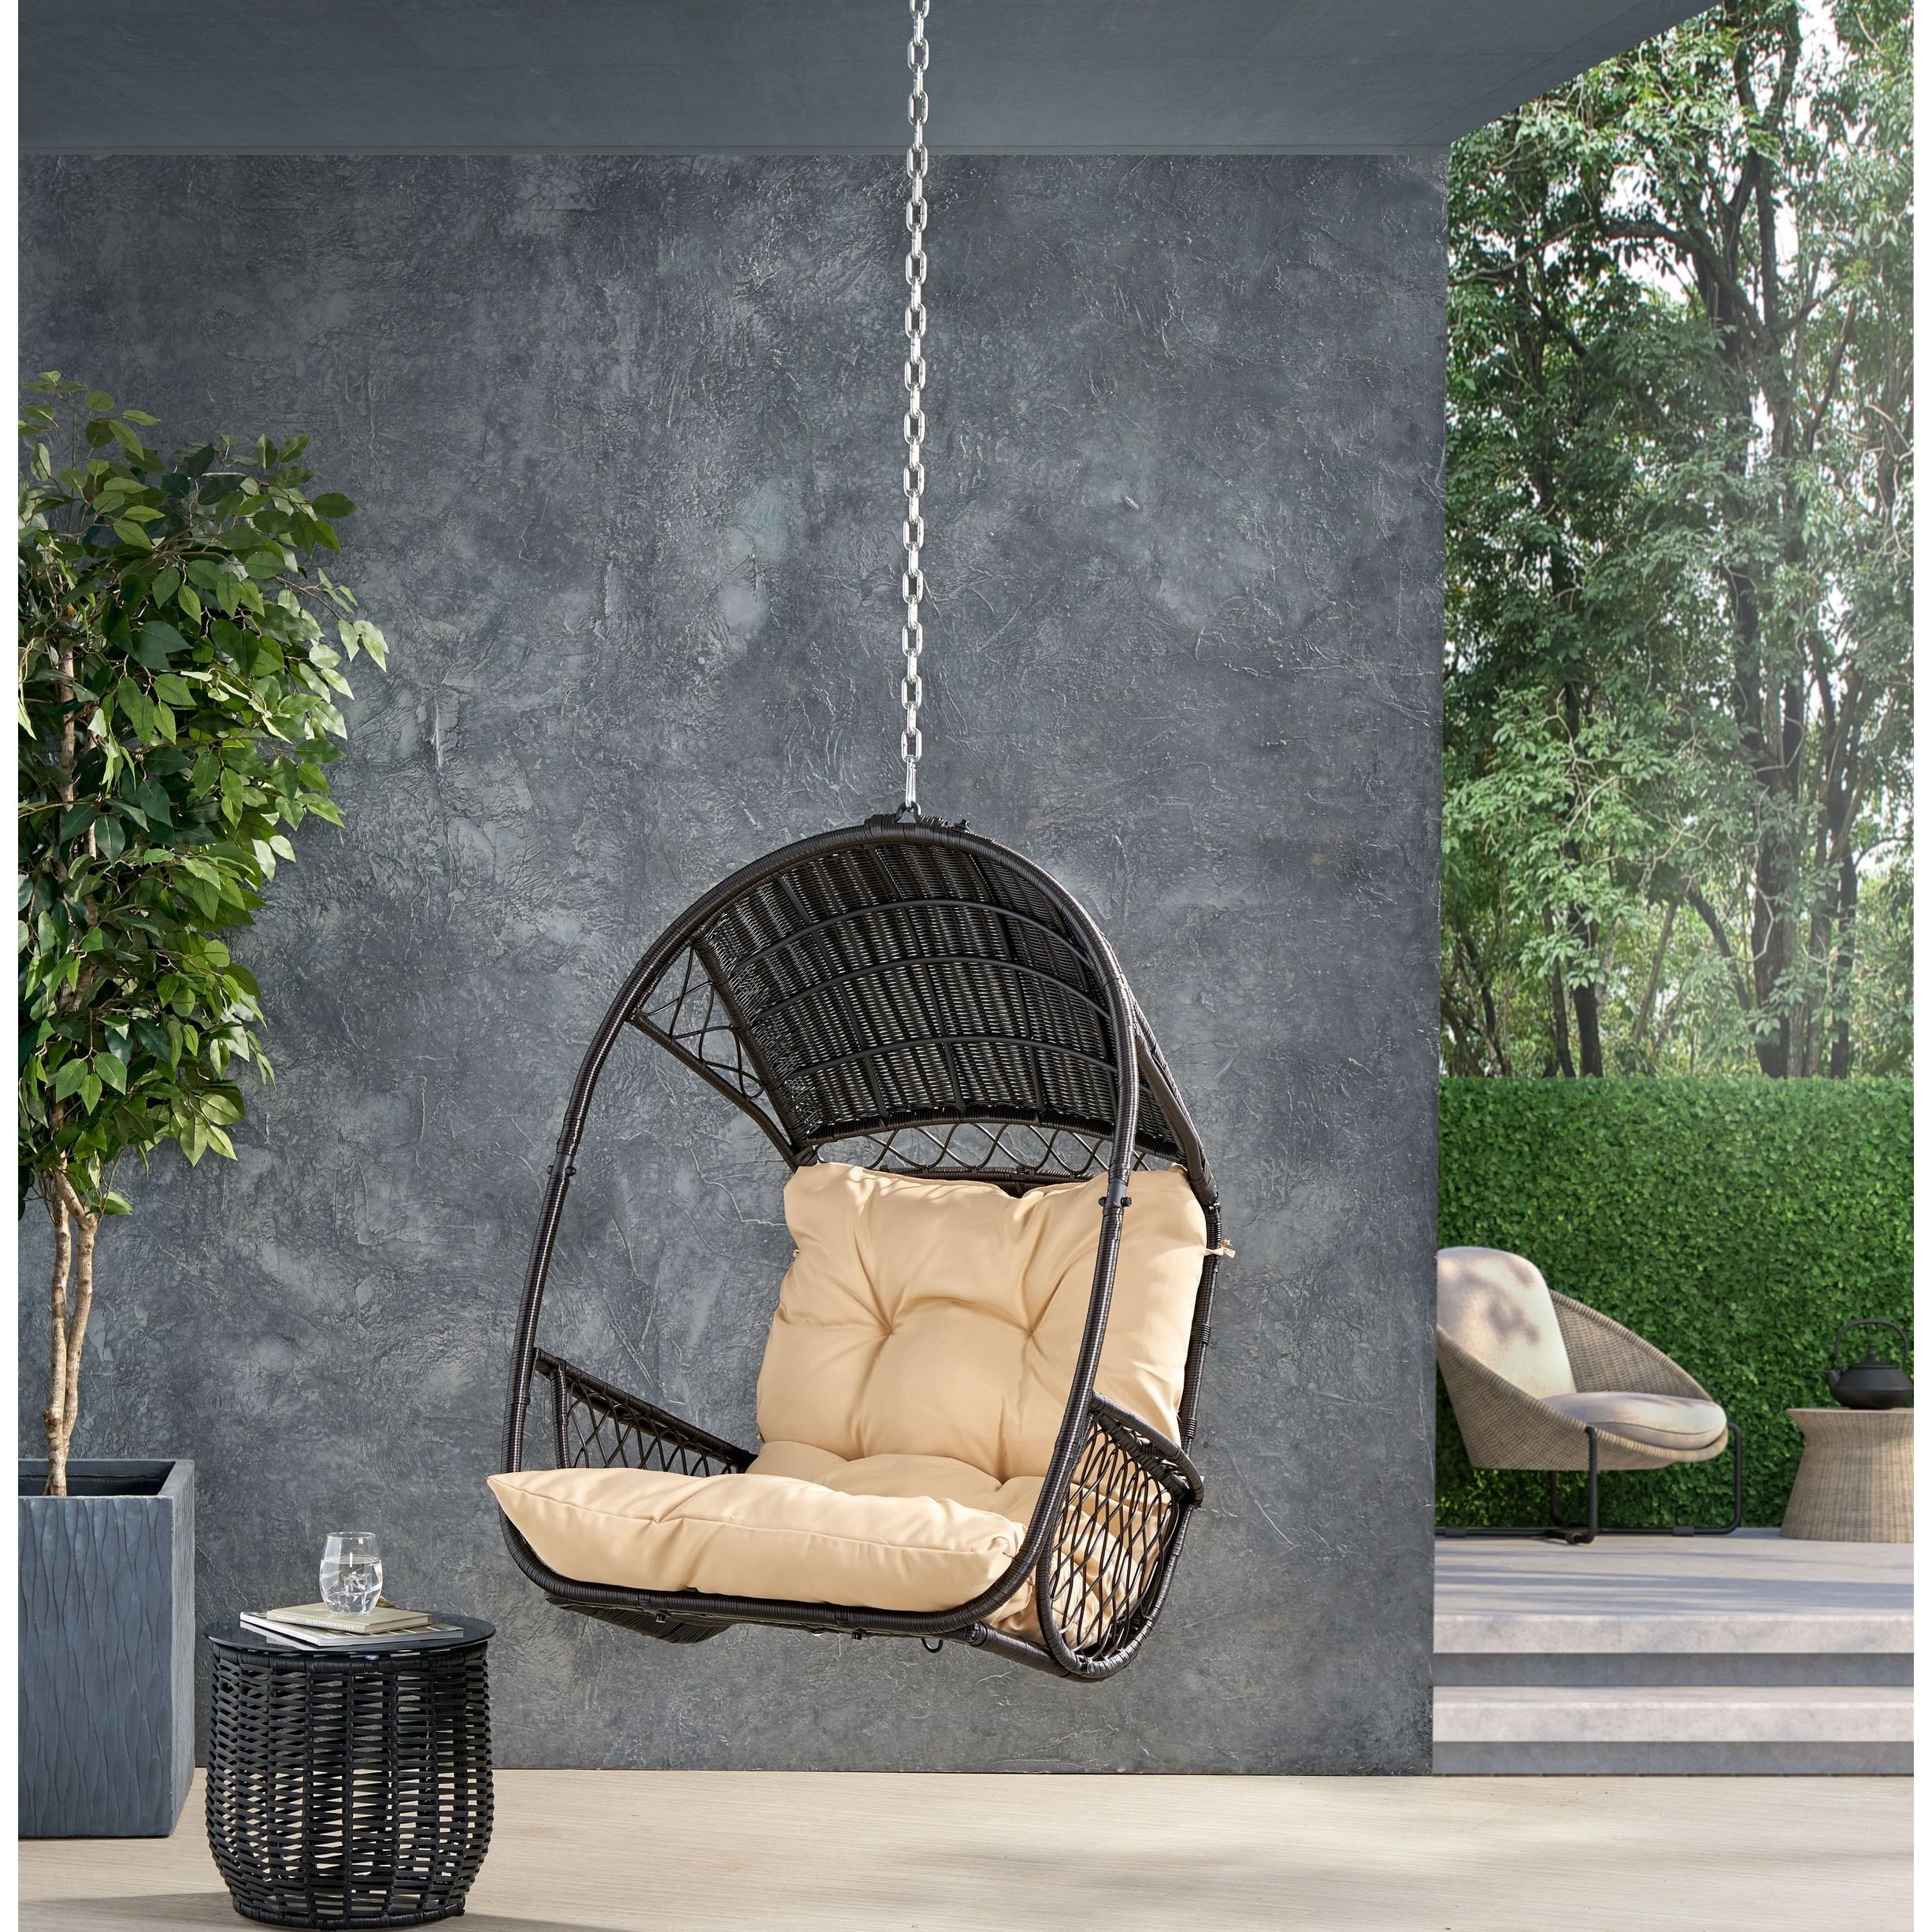 Greystone Outdoor/indoor Wicker Hanging Chair W/8 Foot Chainchristopher  Knight Home – On Sale – Overstock – 31825459 Pertaining To Recent Greystone Plant Stands (View 15 of 15)